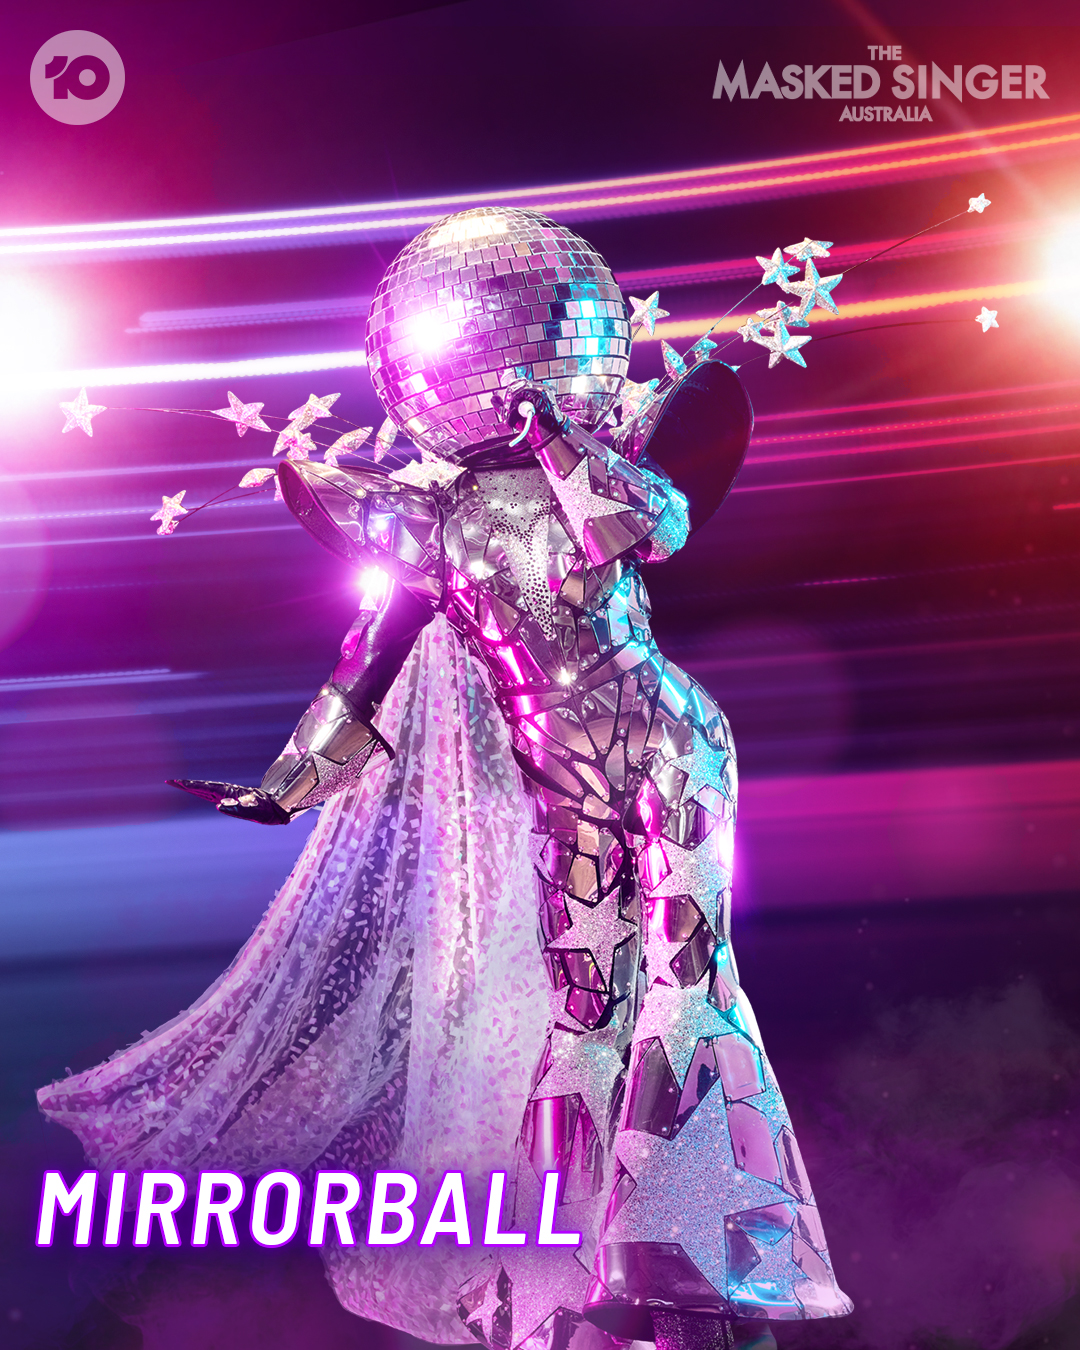 The Mirrorball was not Christina Milian